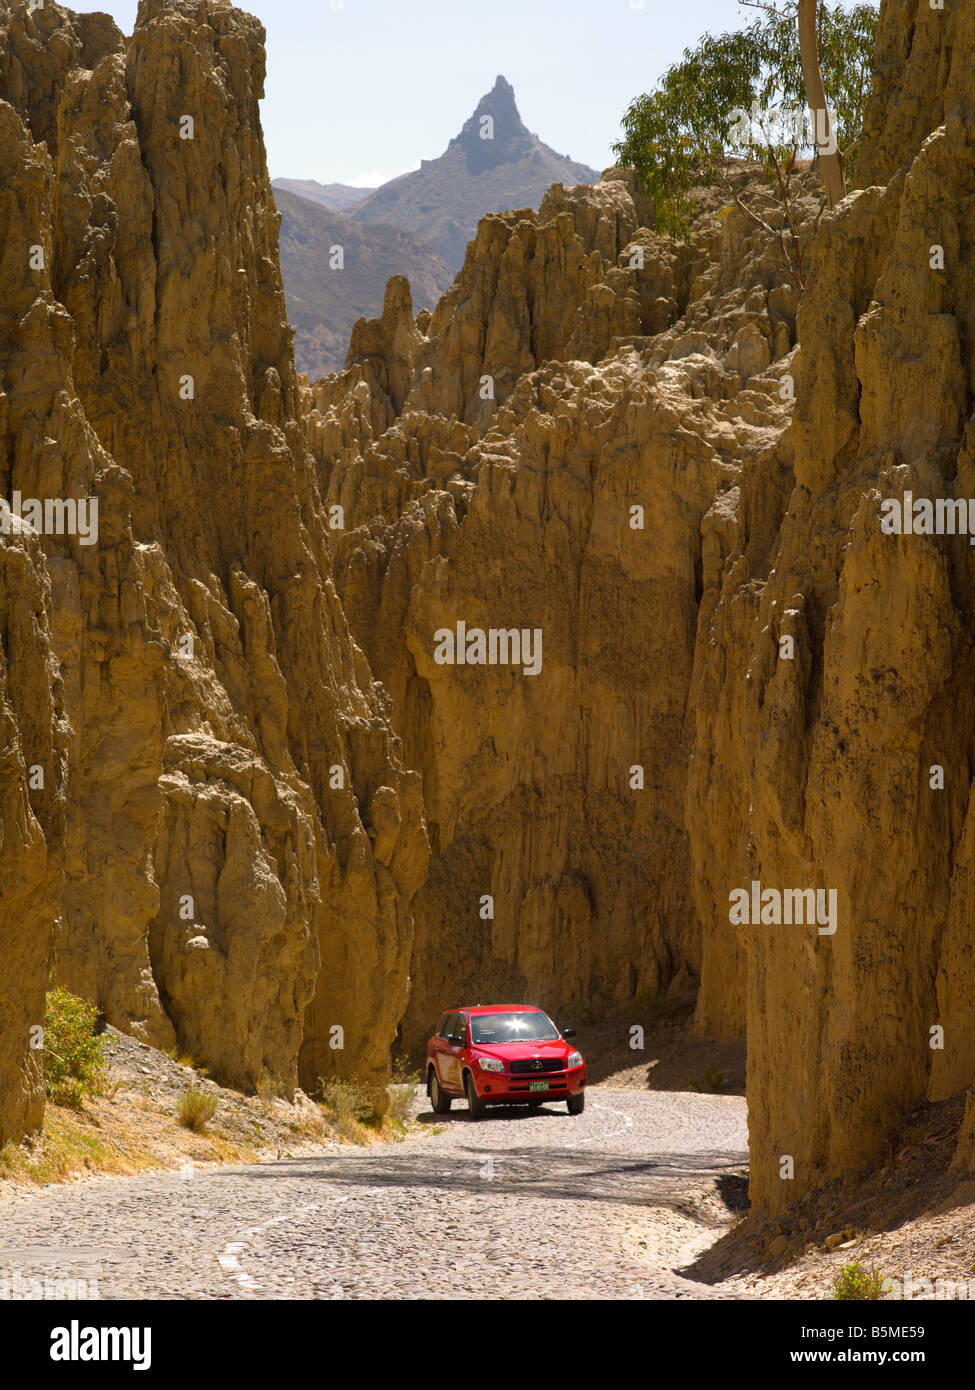 Red car winding road yellow rocky mountain trip touristic peak curve landscape vertical 4x4 truck panoramic rout scenery view Stock Photo